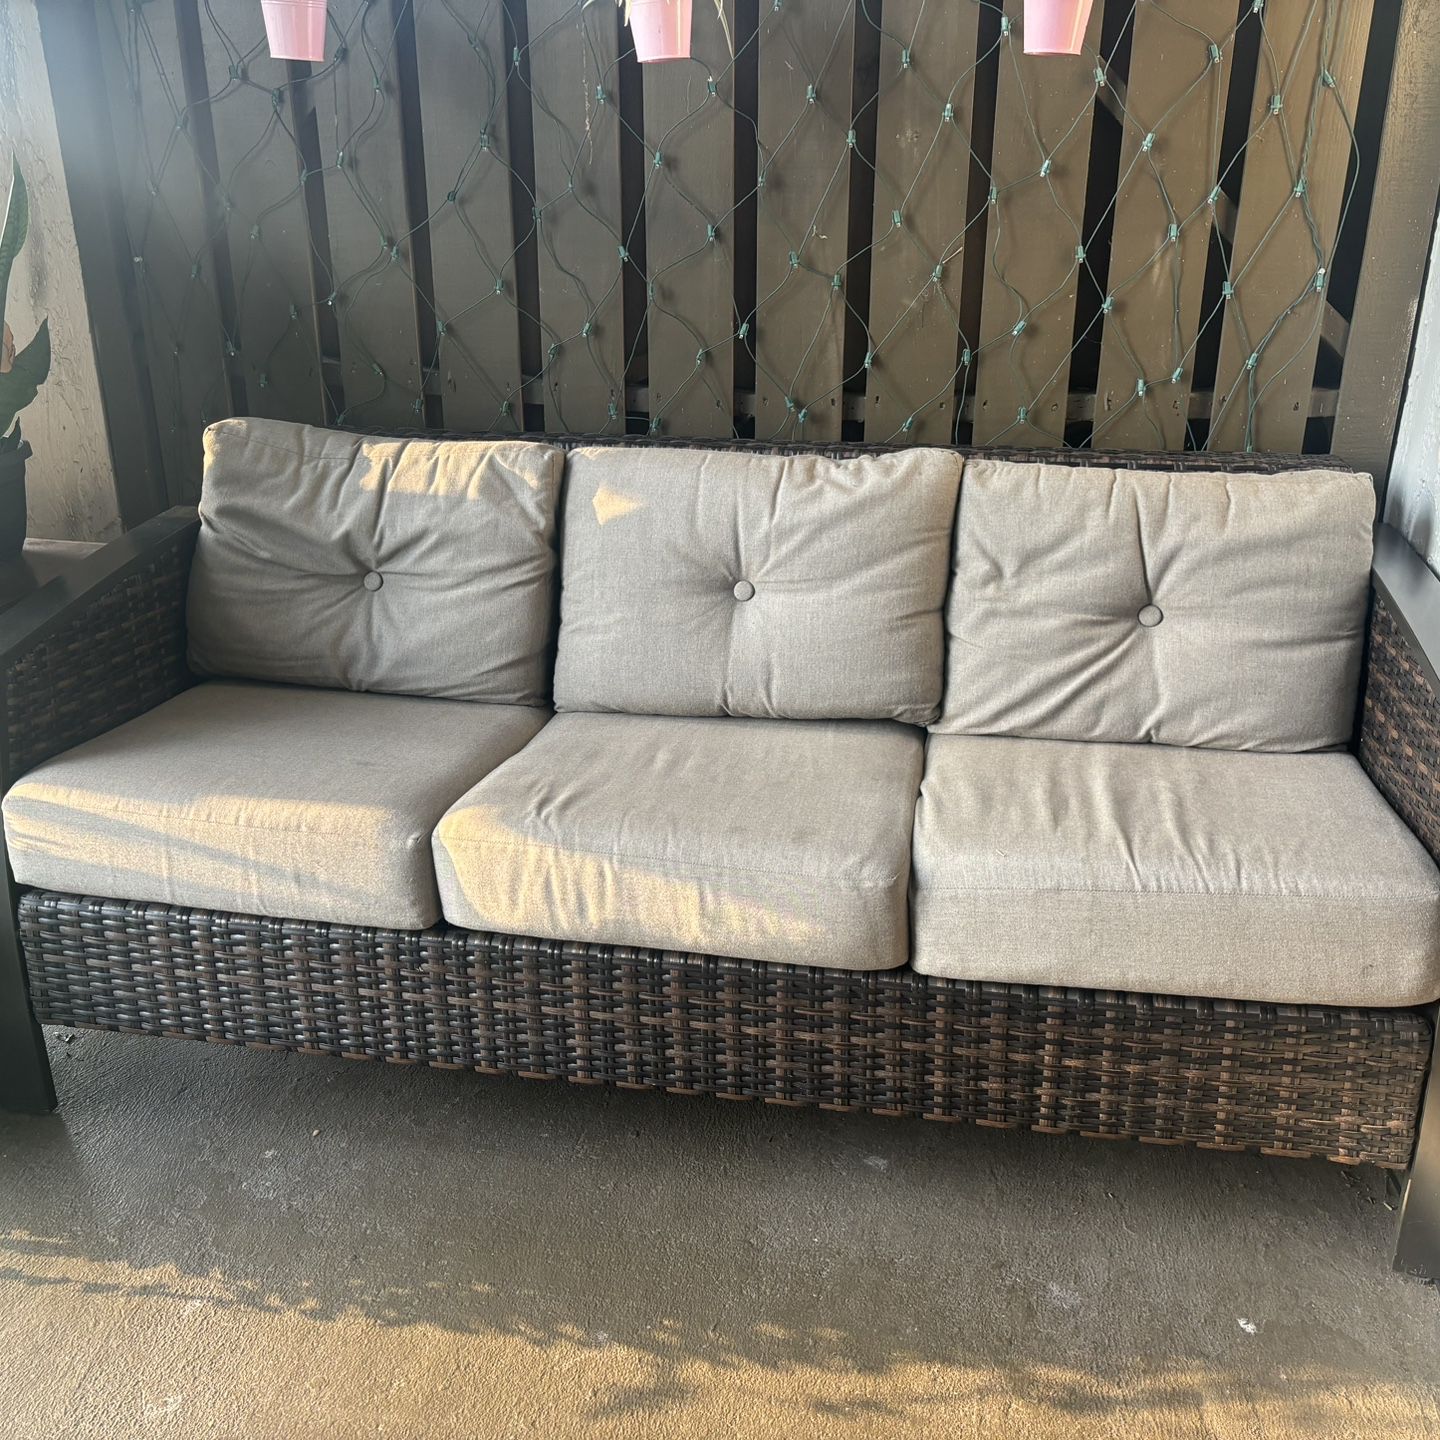 3 Seater Patio Couch